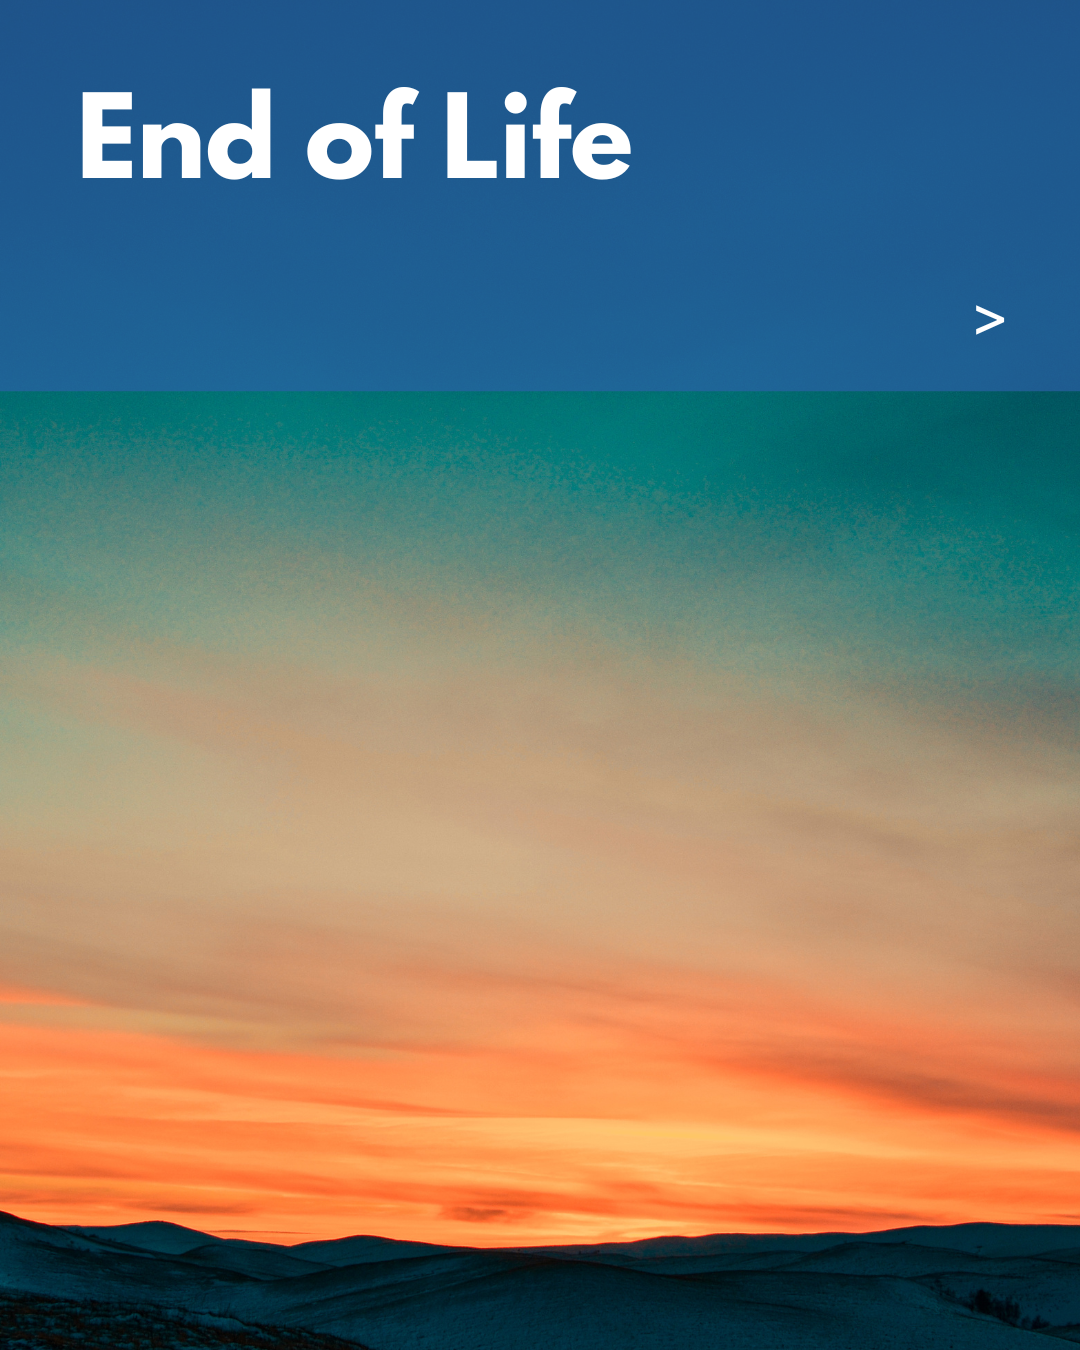 end of life